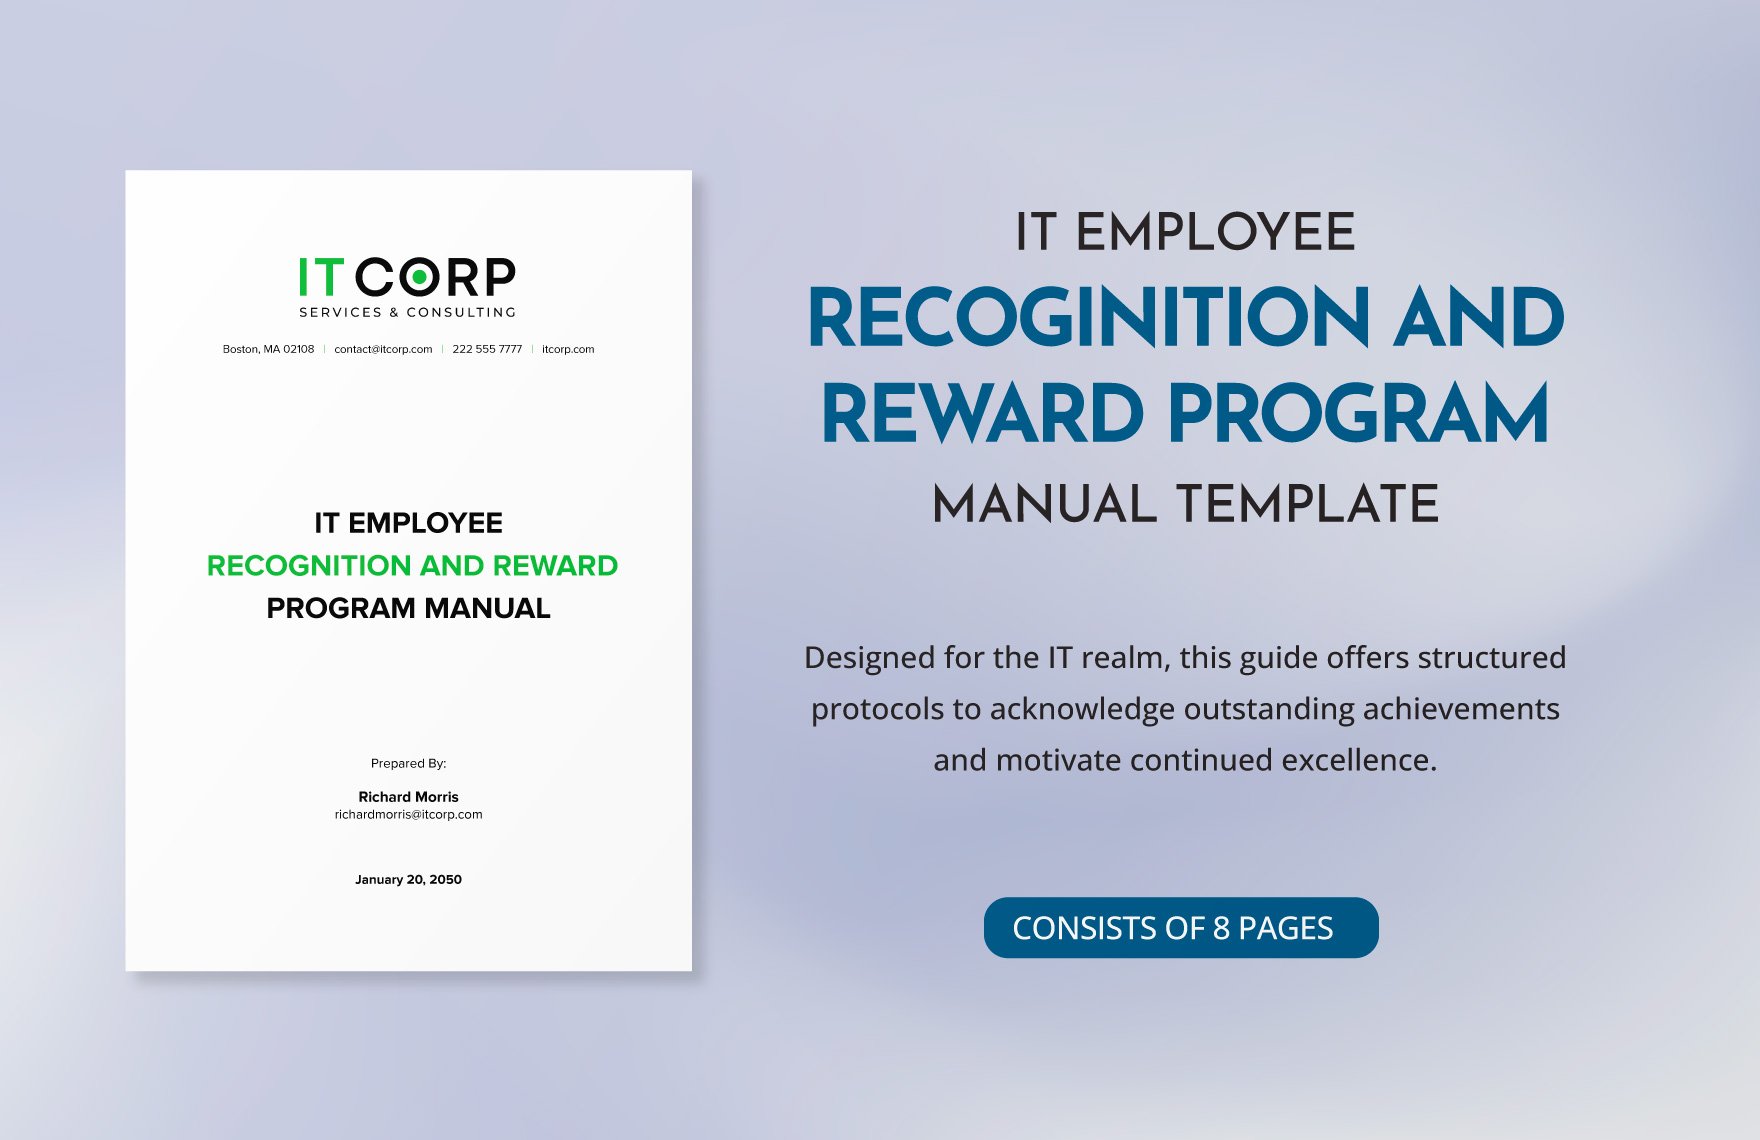 IT Employee Recognition and Reward Program Manual Template